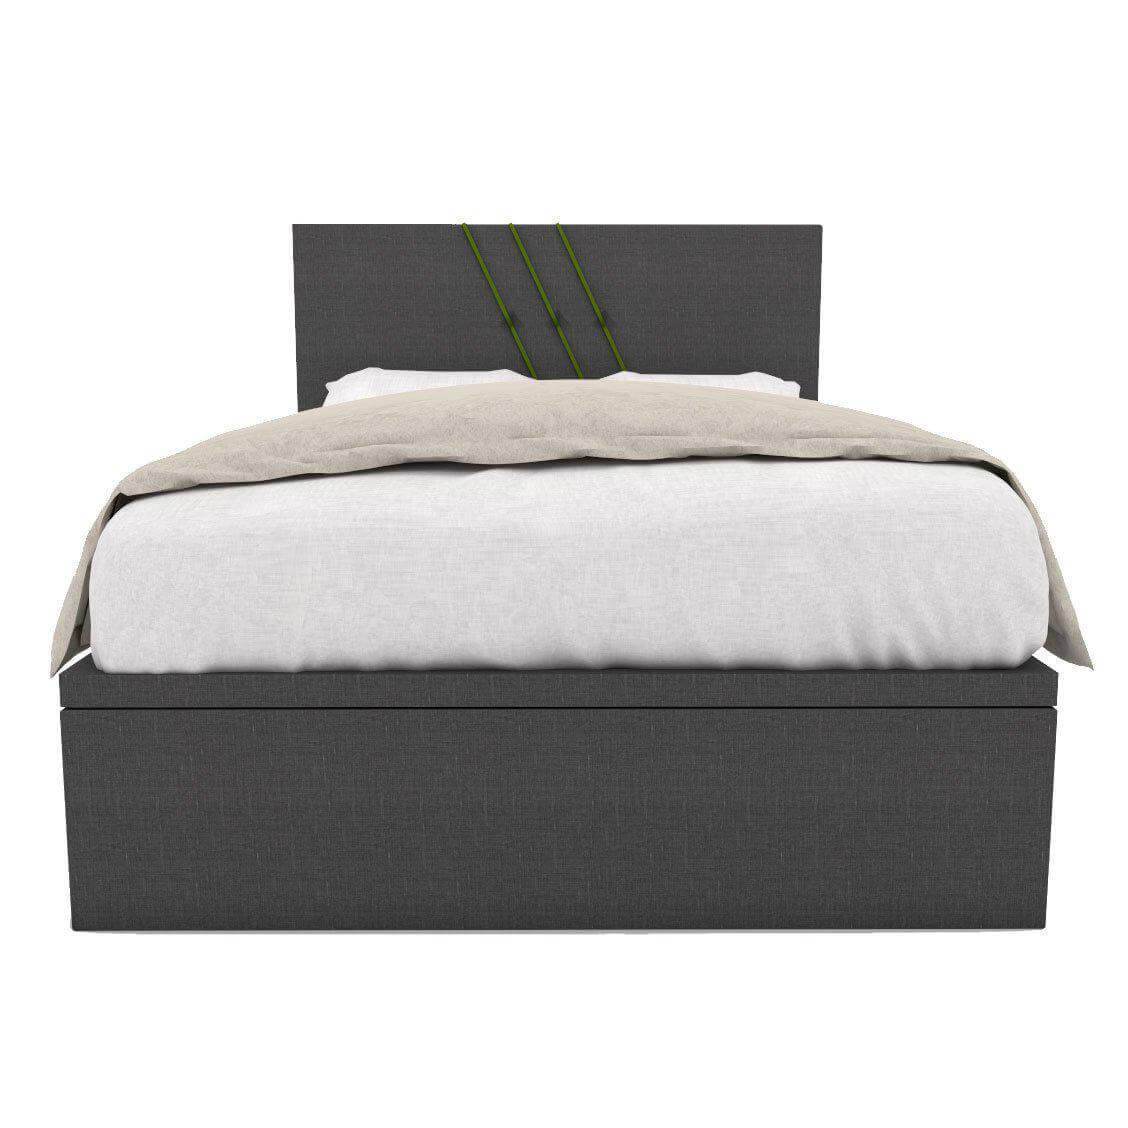 Lorina Grey Fabric Storage Bed (Water Repellent) Singapore